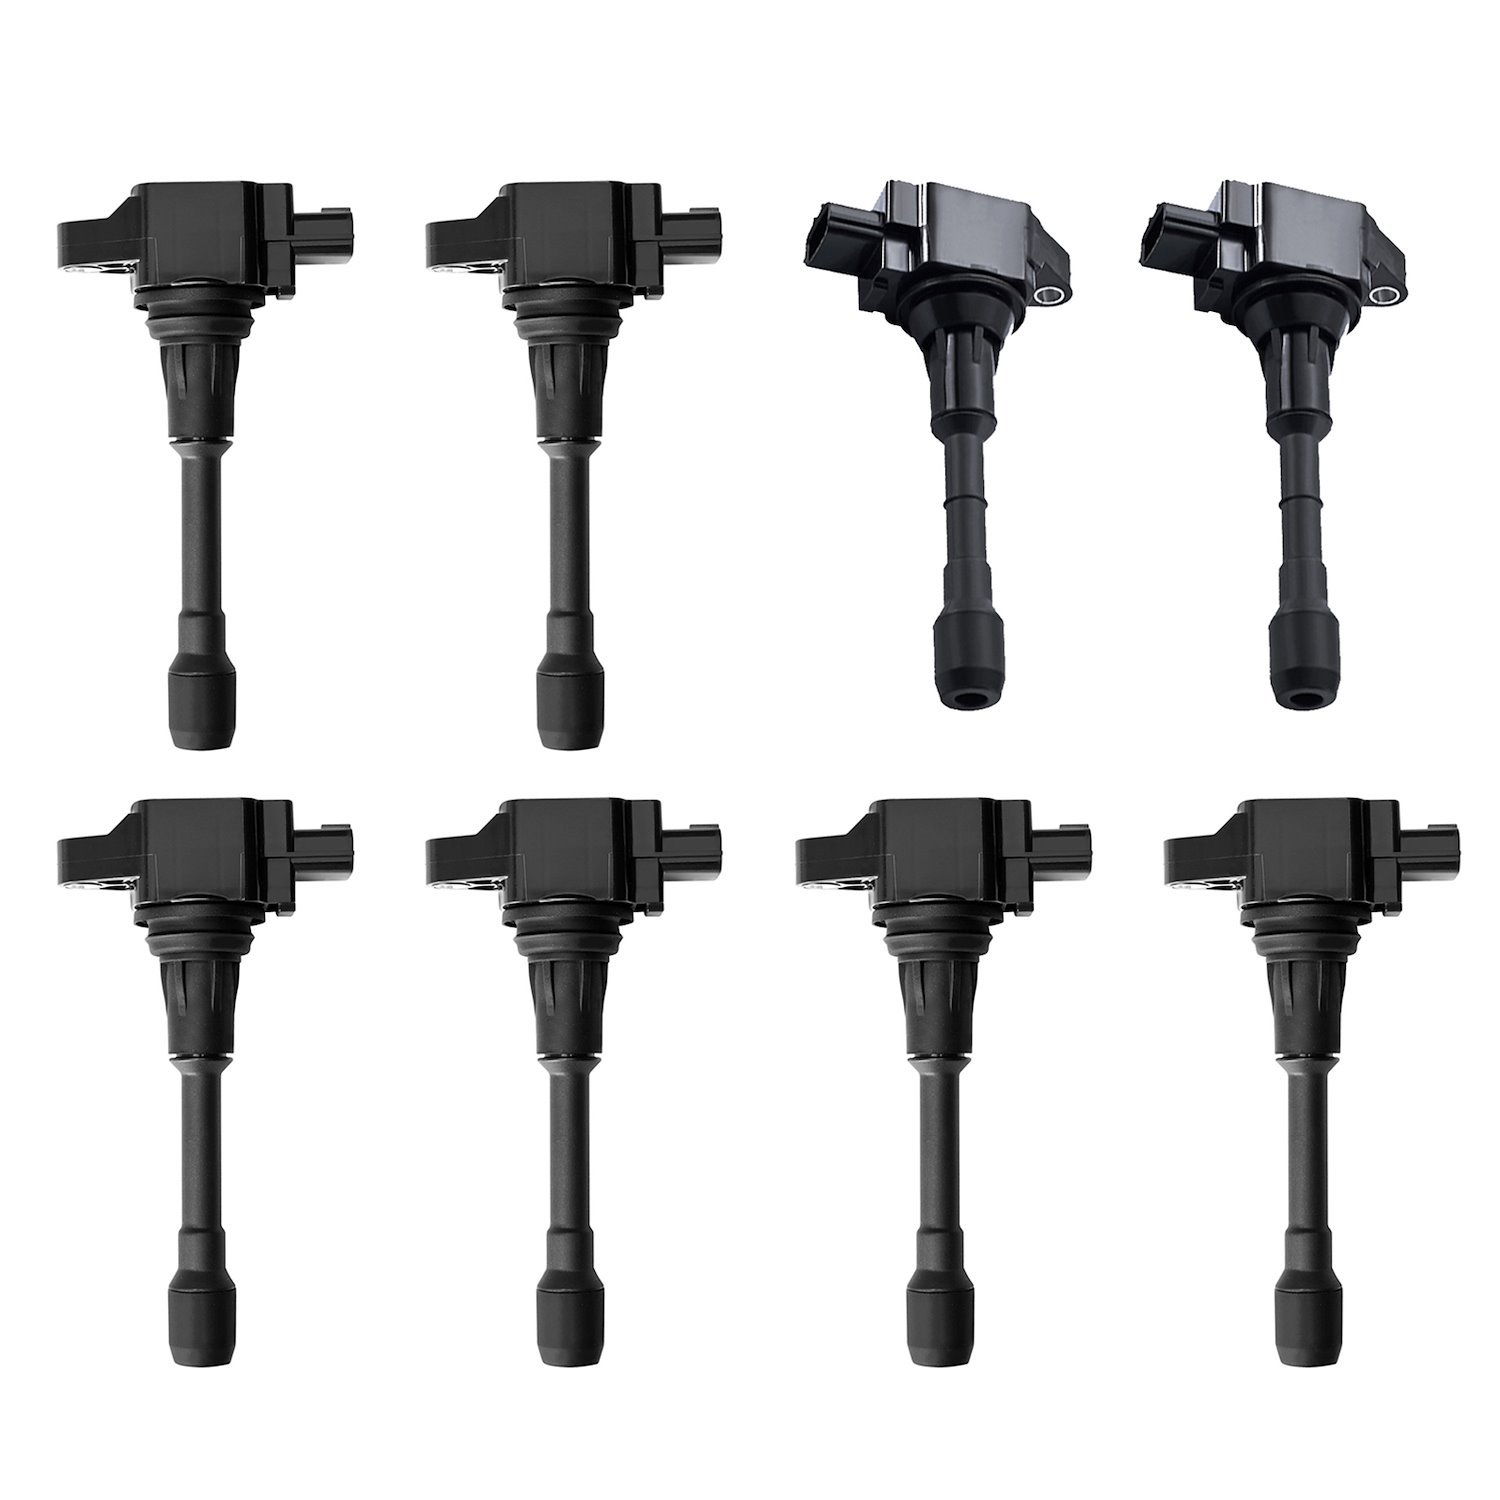 OE Replacement Ignition Coils for 2014-2018 Nissan Frontier [Black]